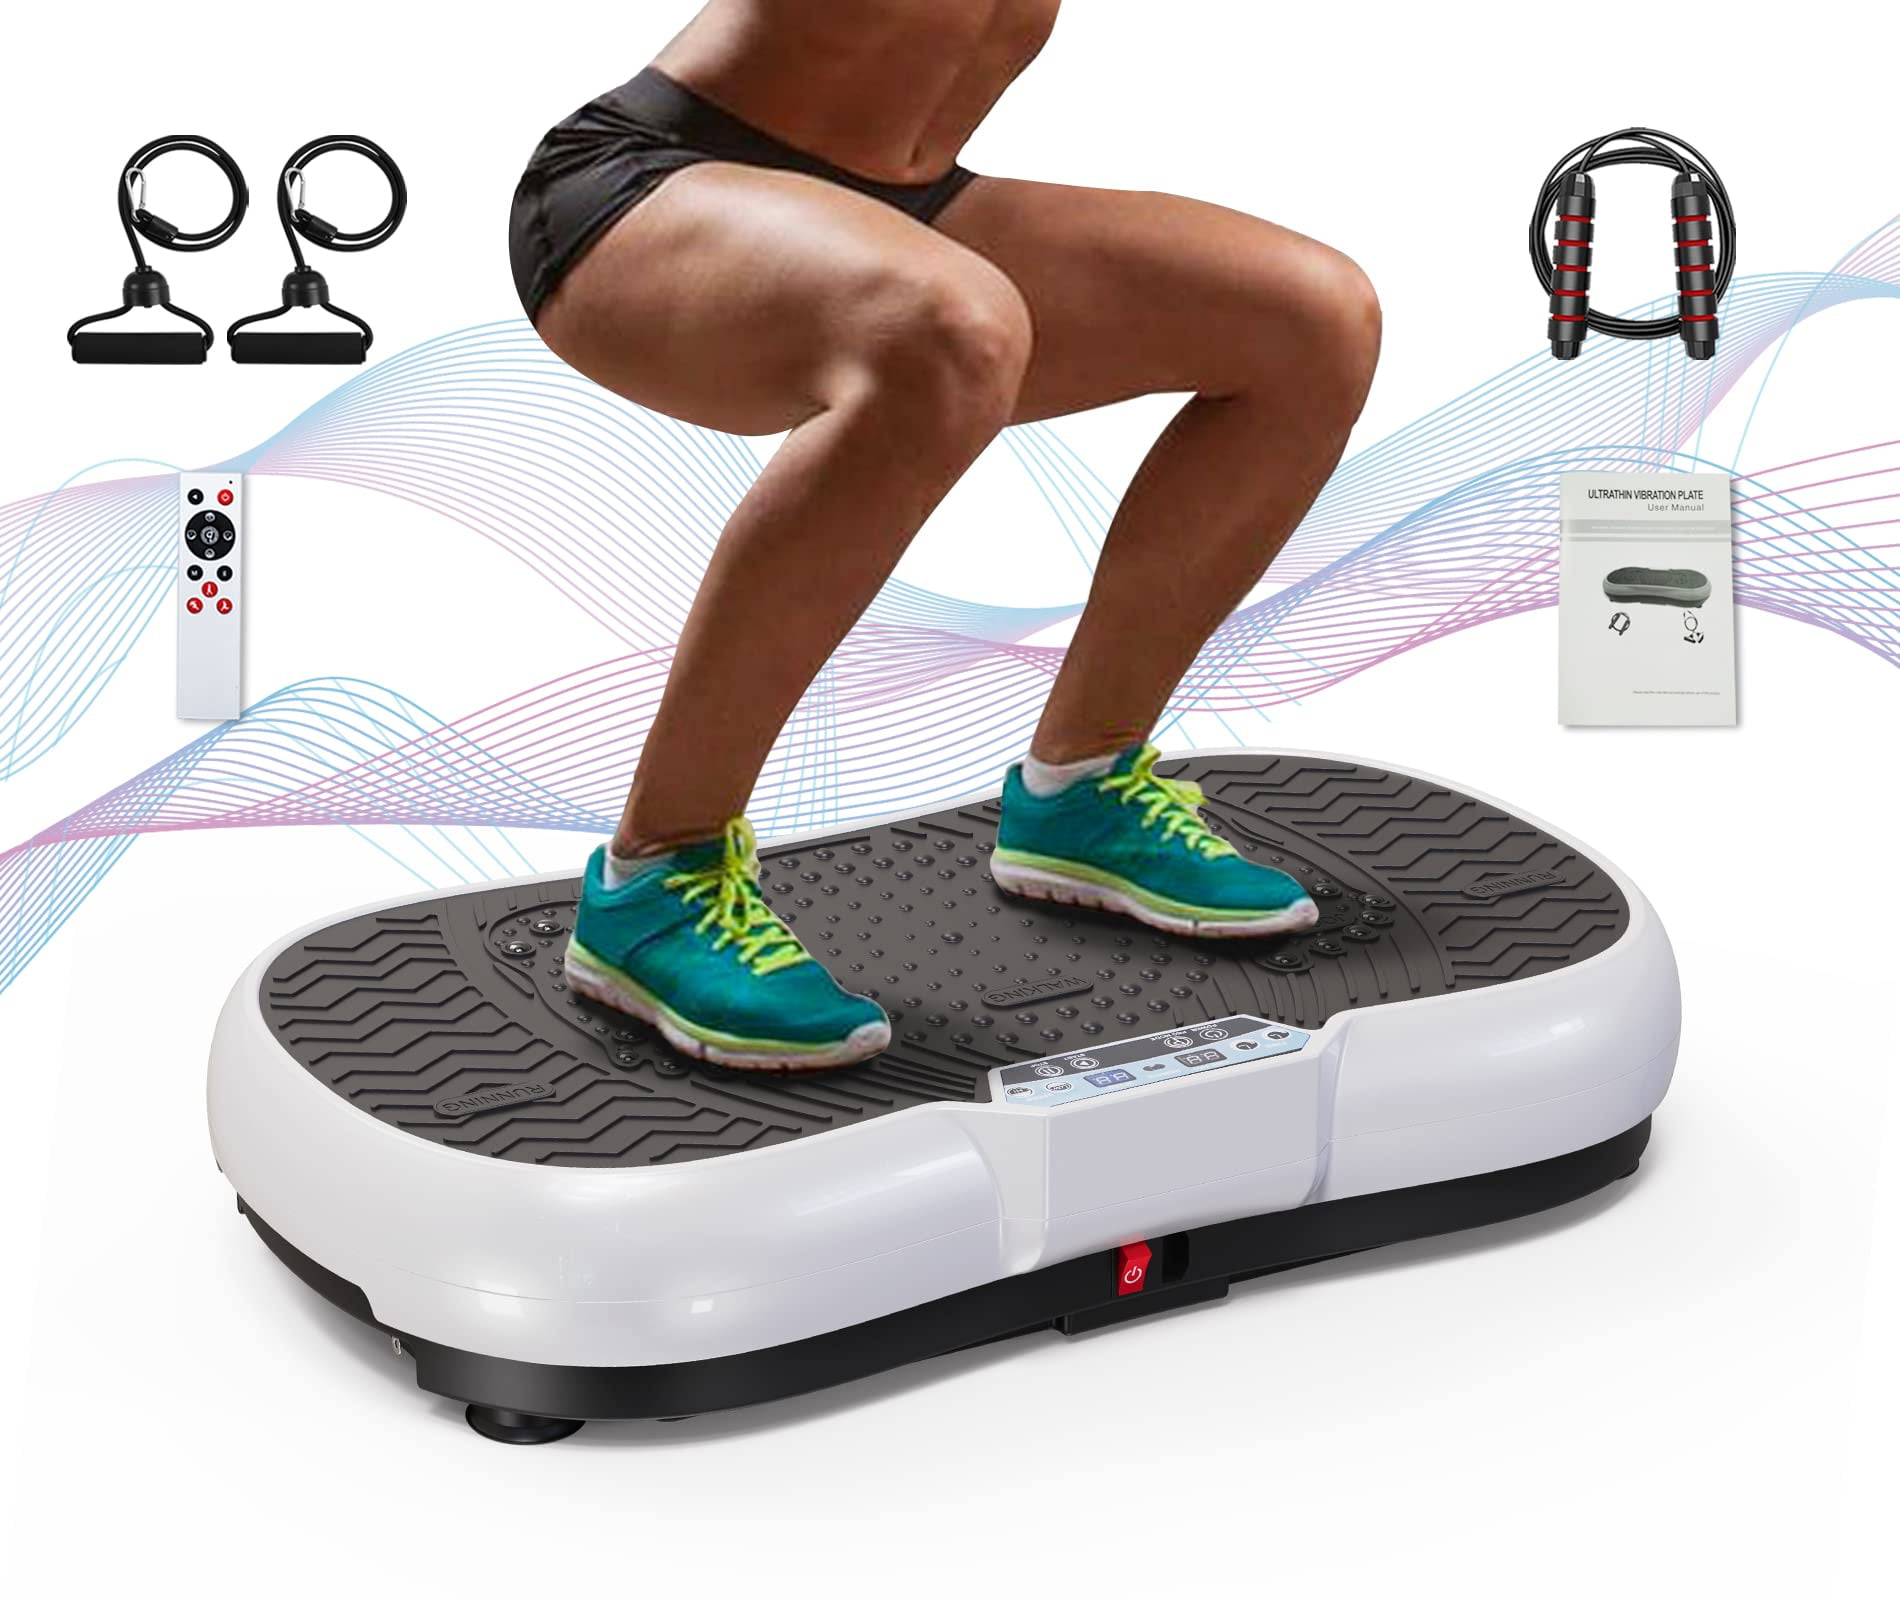 Bigzzia Vibration Plate Exercise Machine Whole Body Workout Vibration  Fitness Platform w/ Loop Bands Jump Rope Bluetooth Speaker Home Training